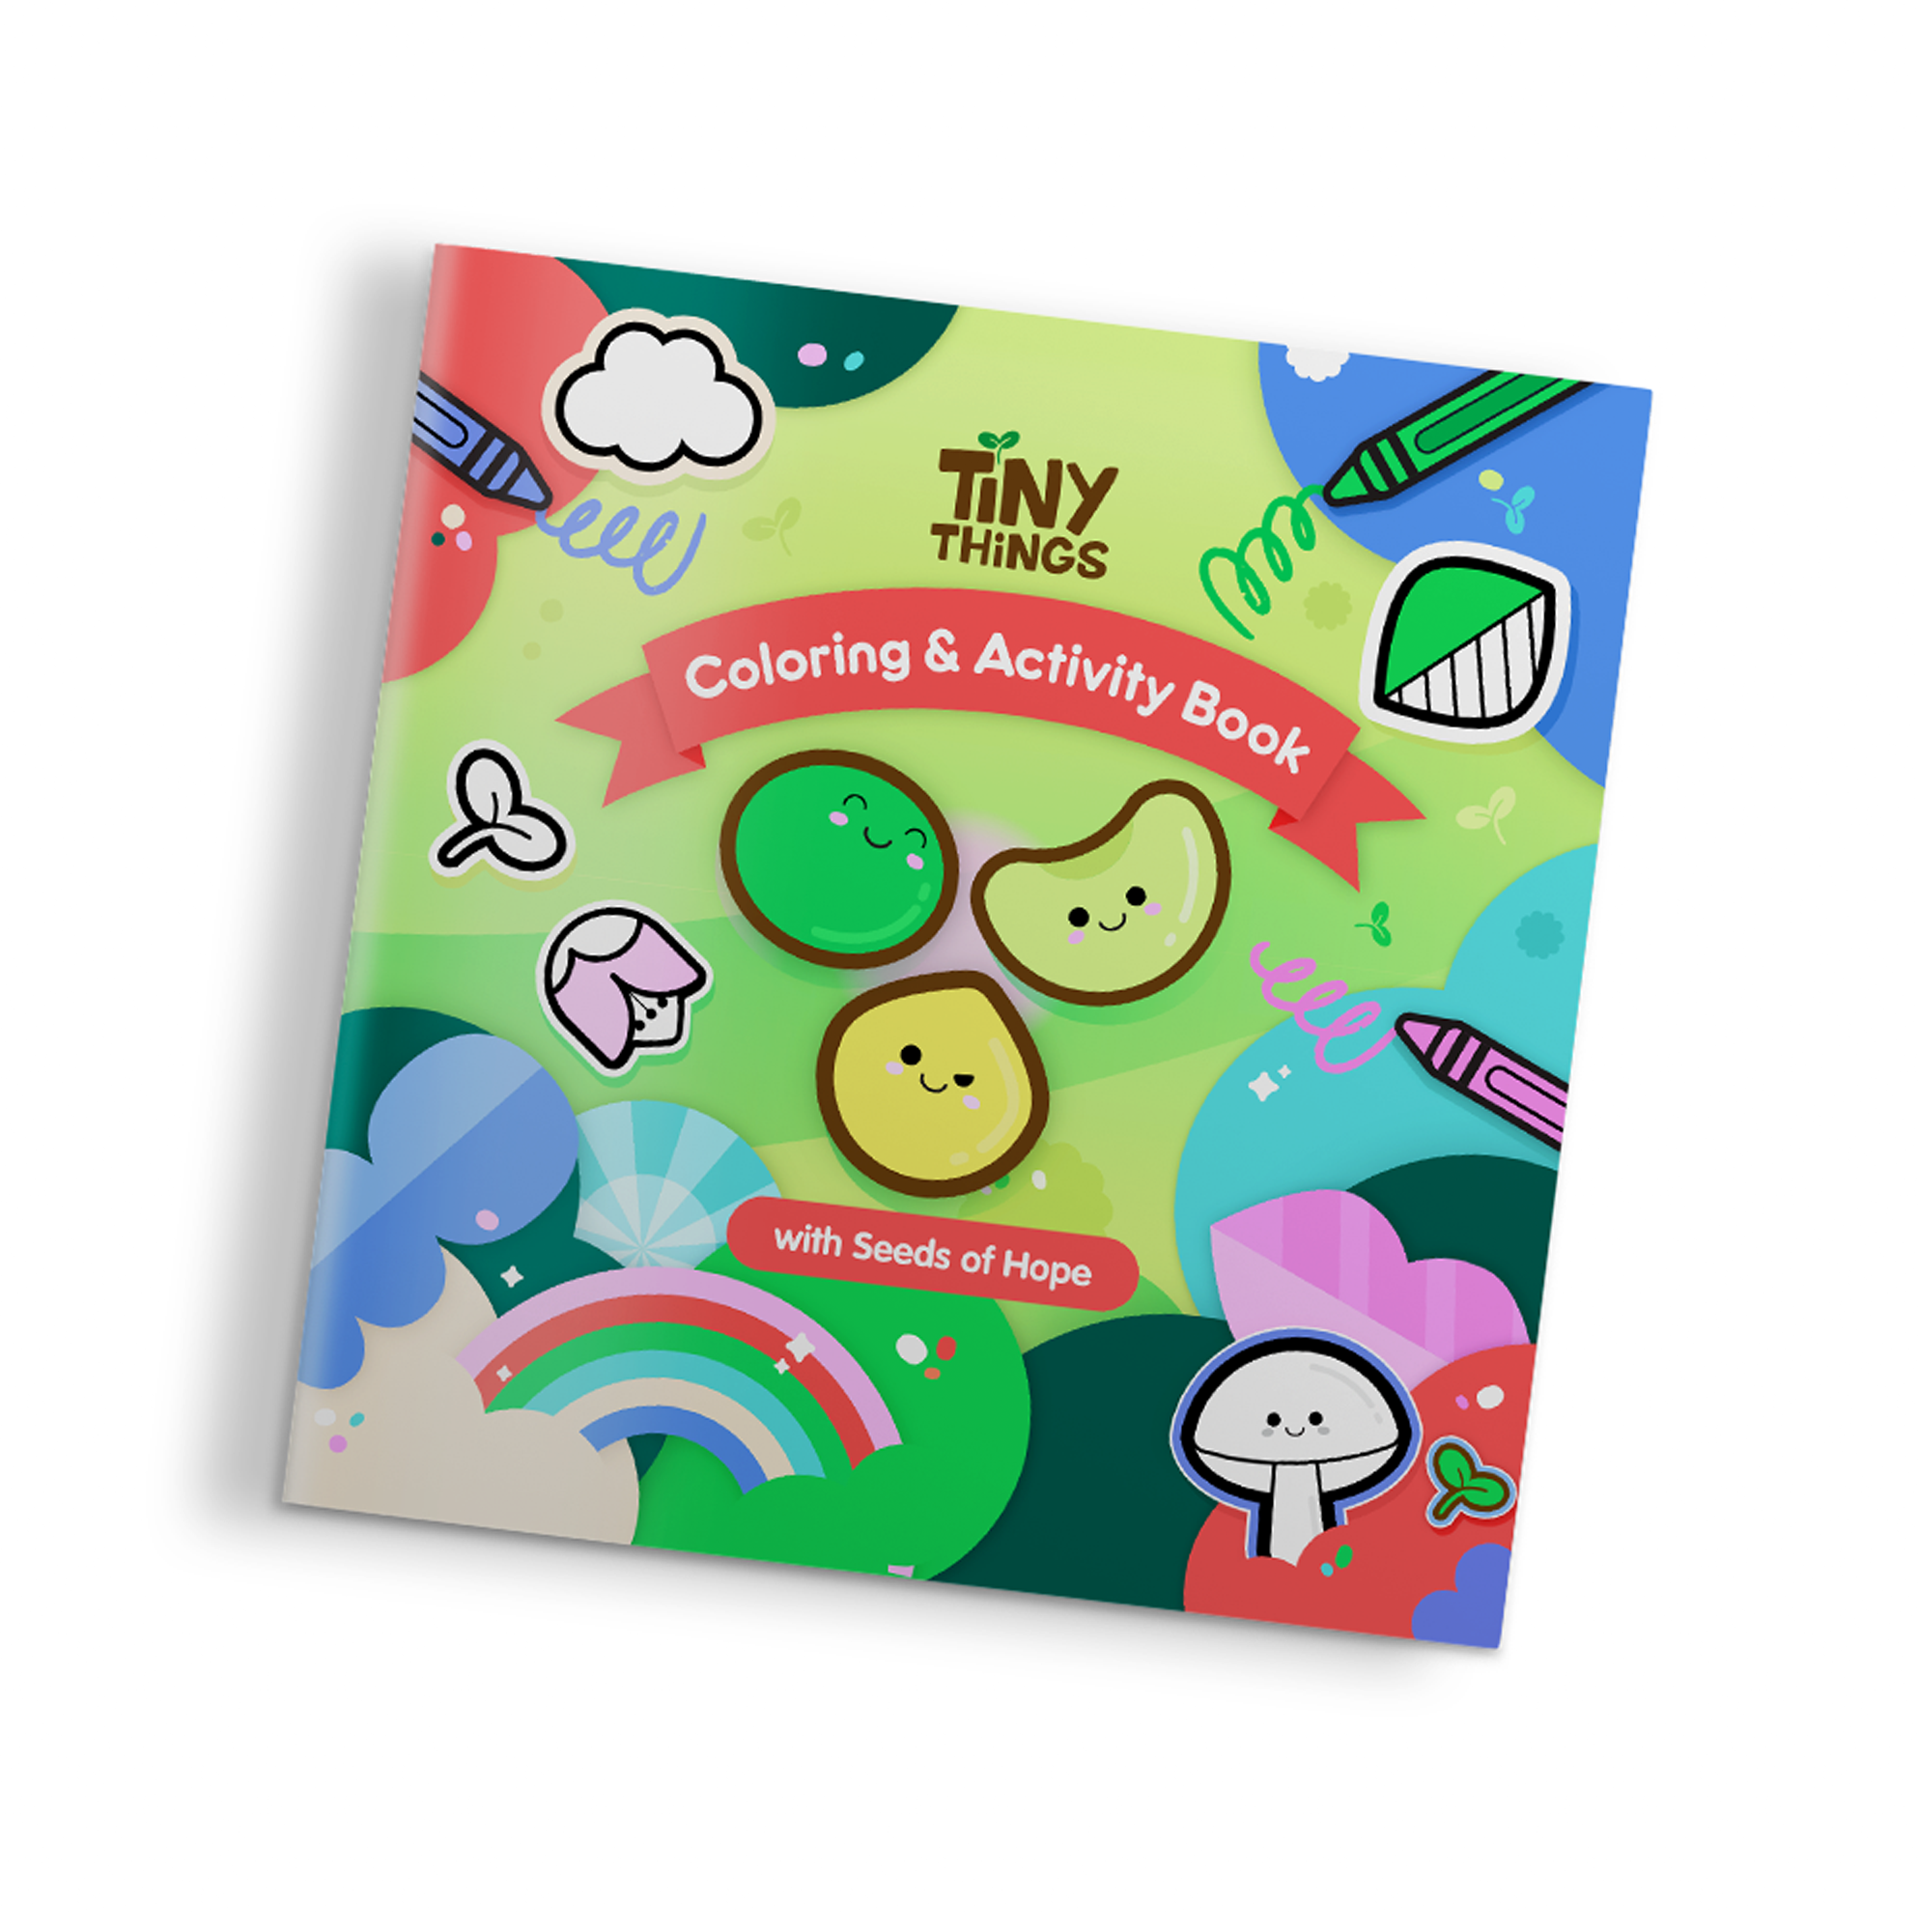 Tiny things Seeds of Hope Coloring & Activity Book